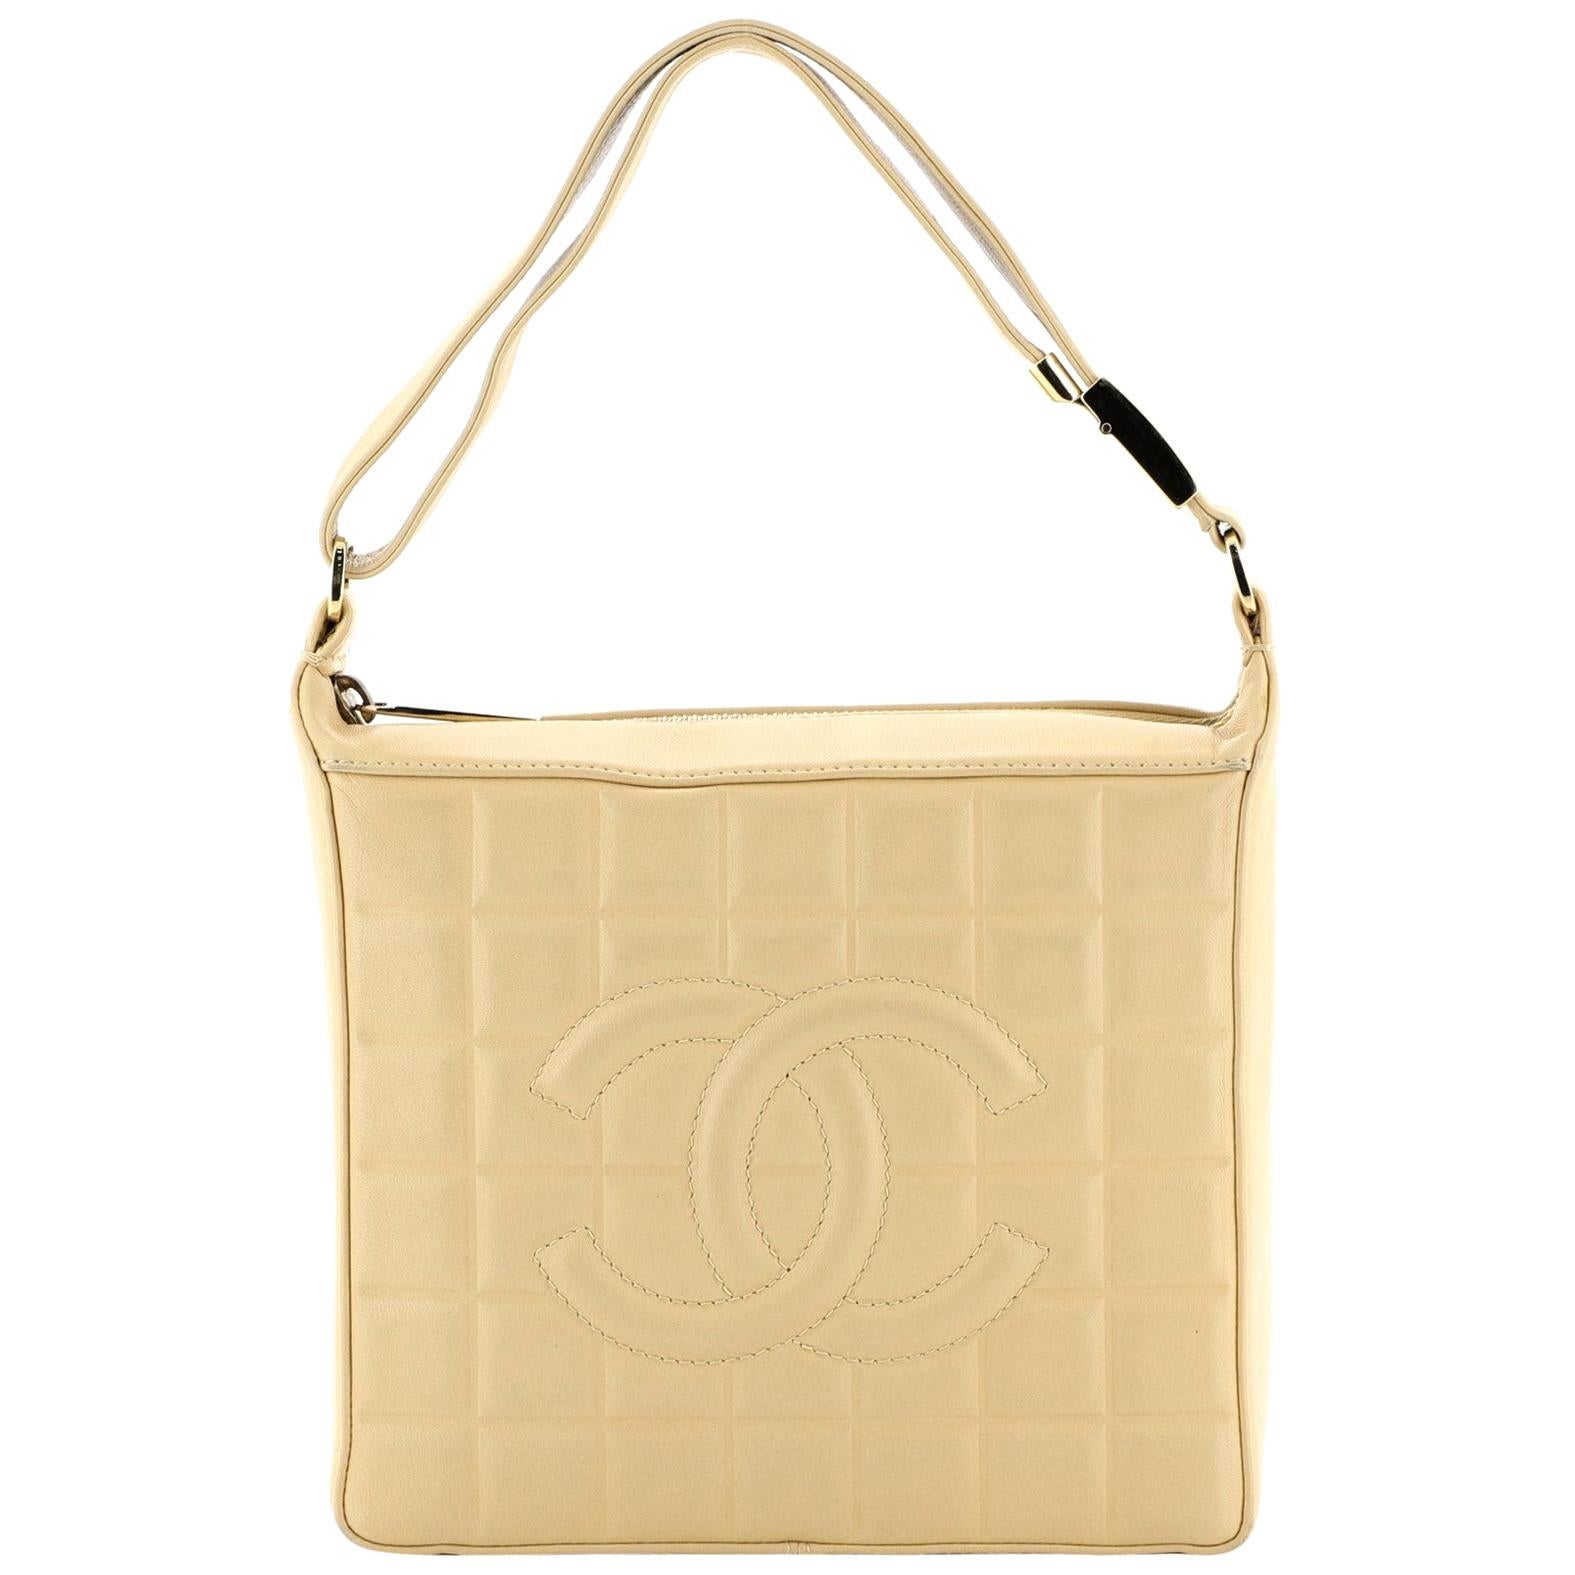 Chanel 2000s Limited Edition Chocolate Bar Reissue Jumbo Flap Bag